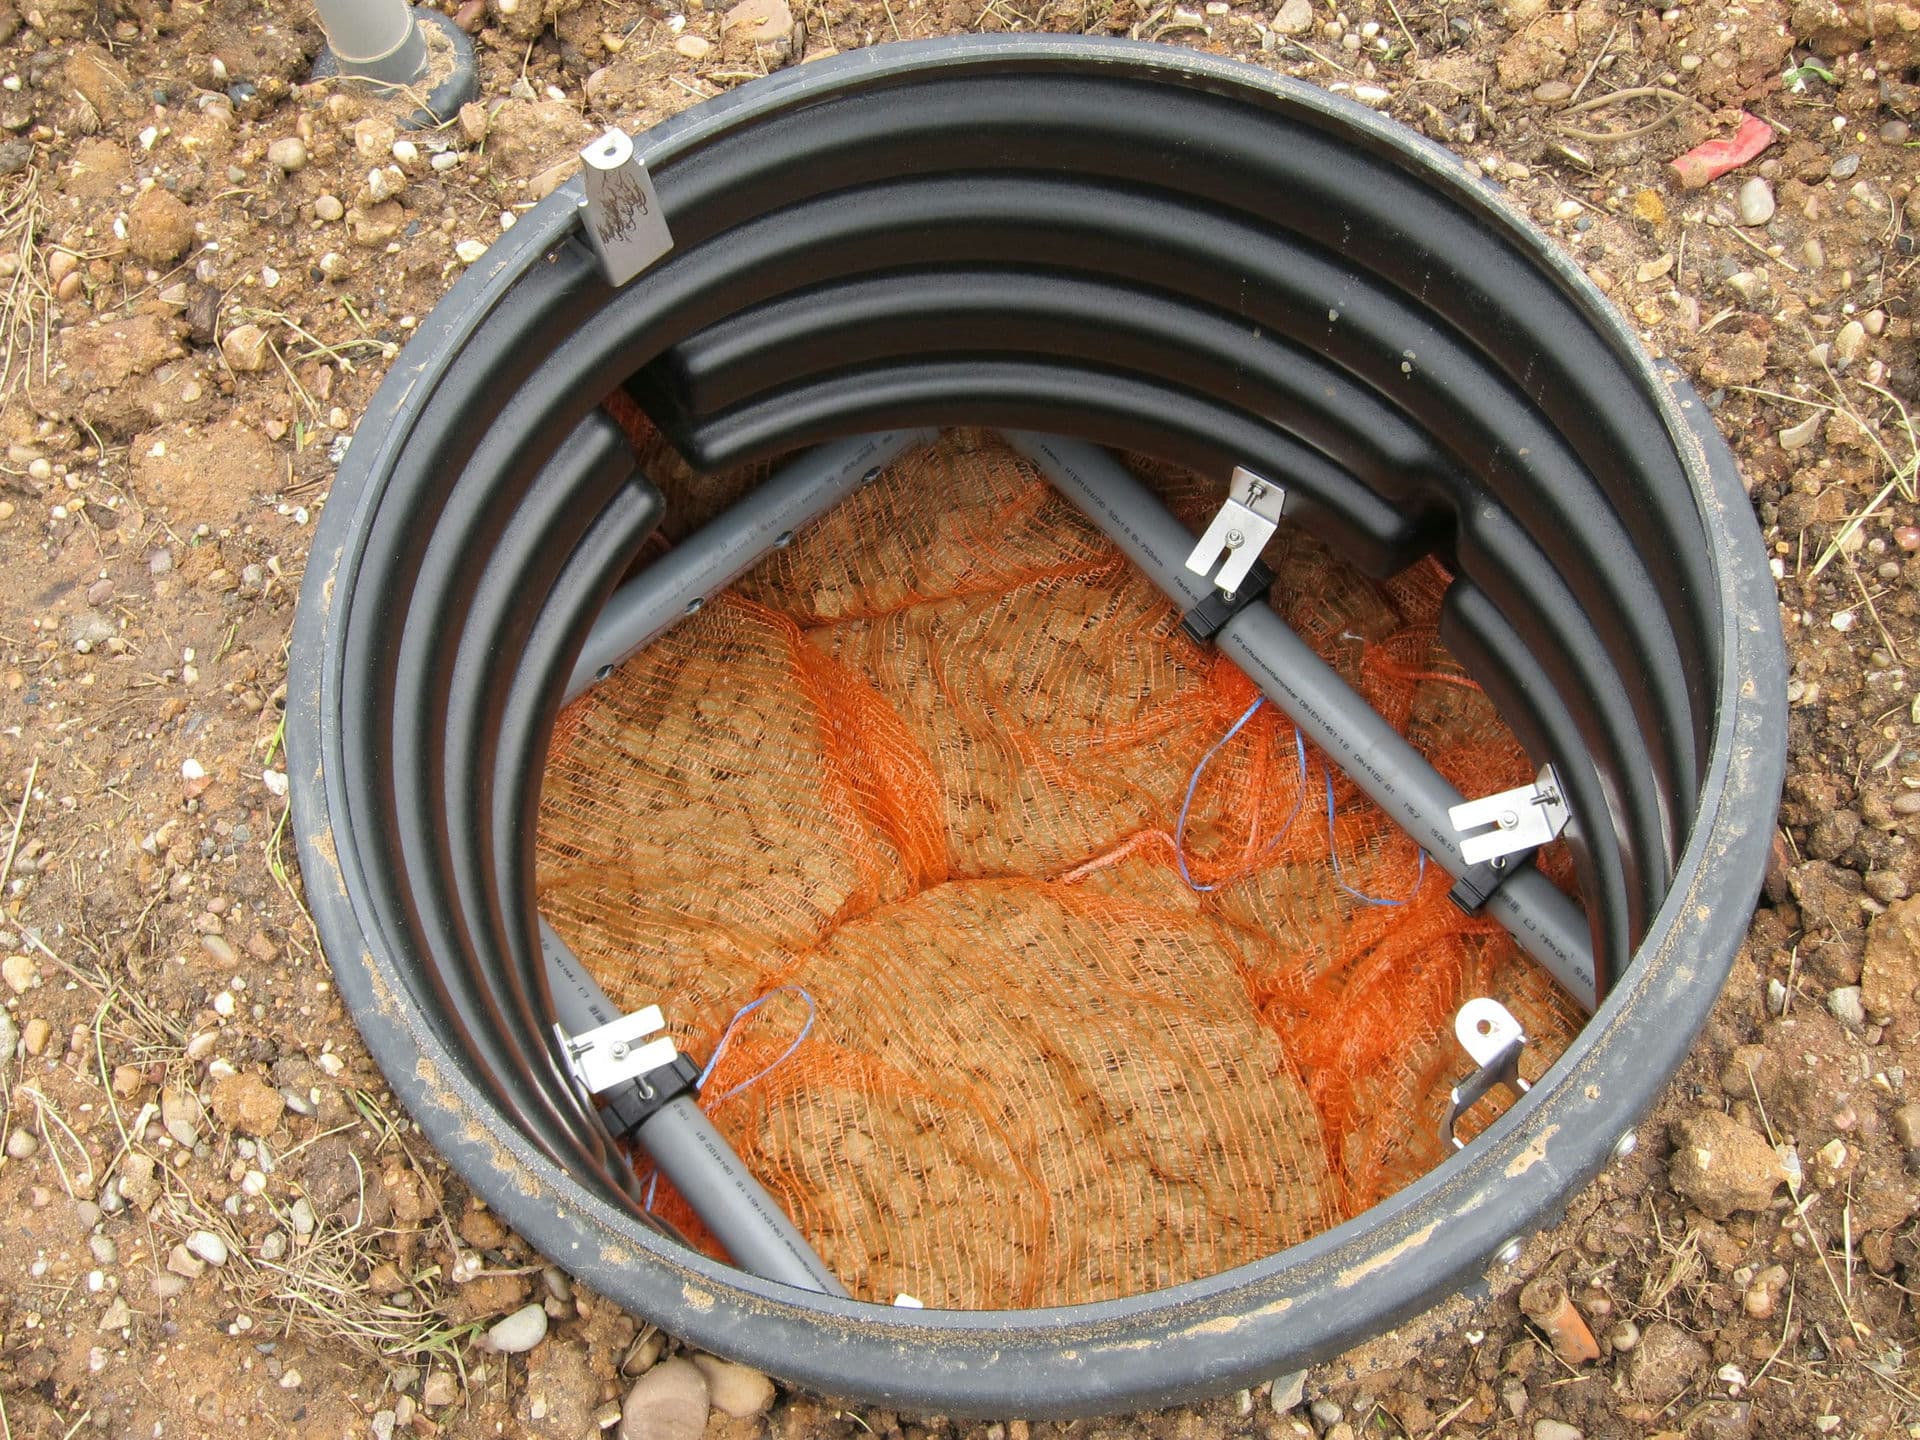 The view in the top of the BIOROCK unit, showing the grey effluent delivery pipes and the foam media inside orange string bags